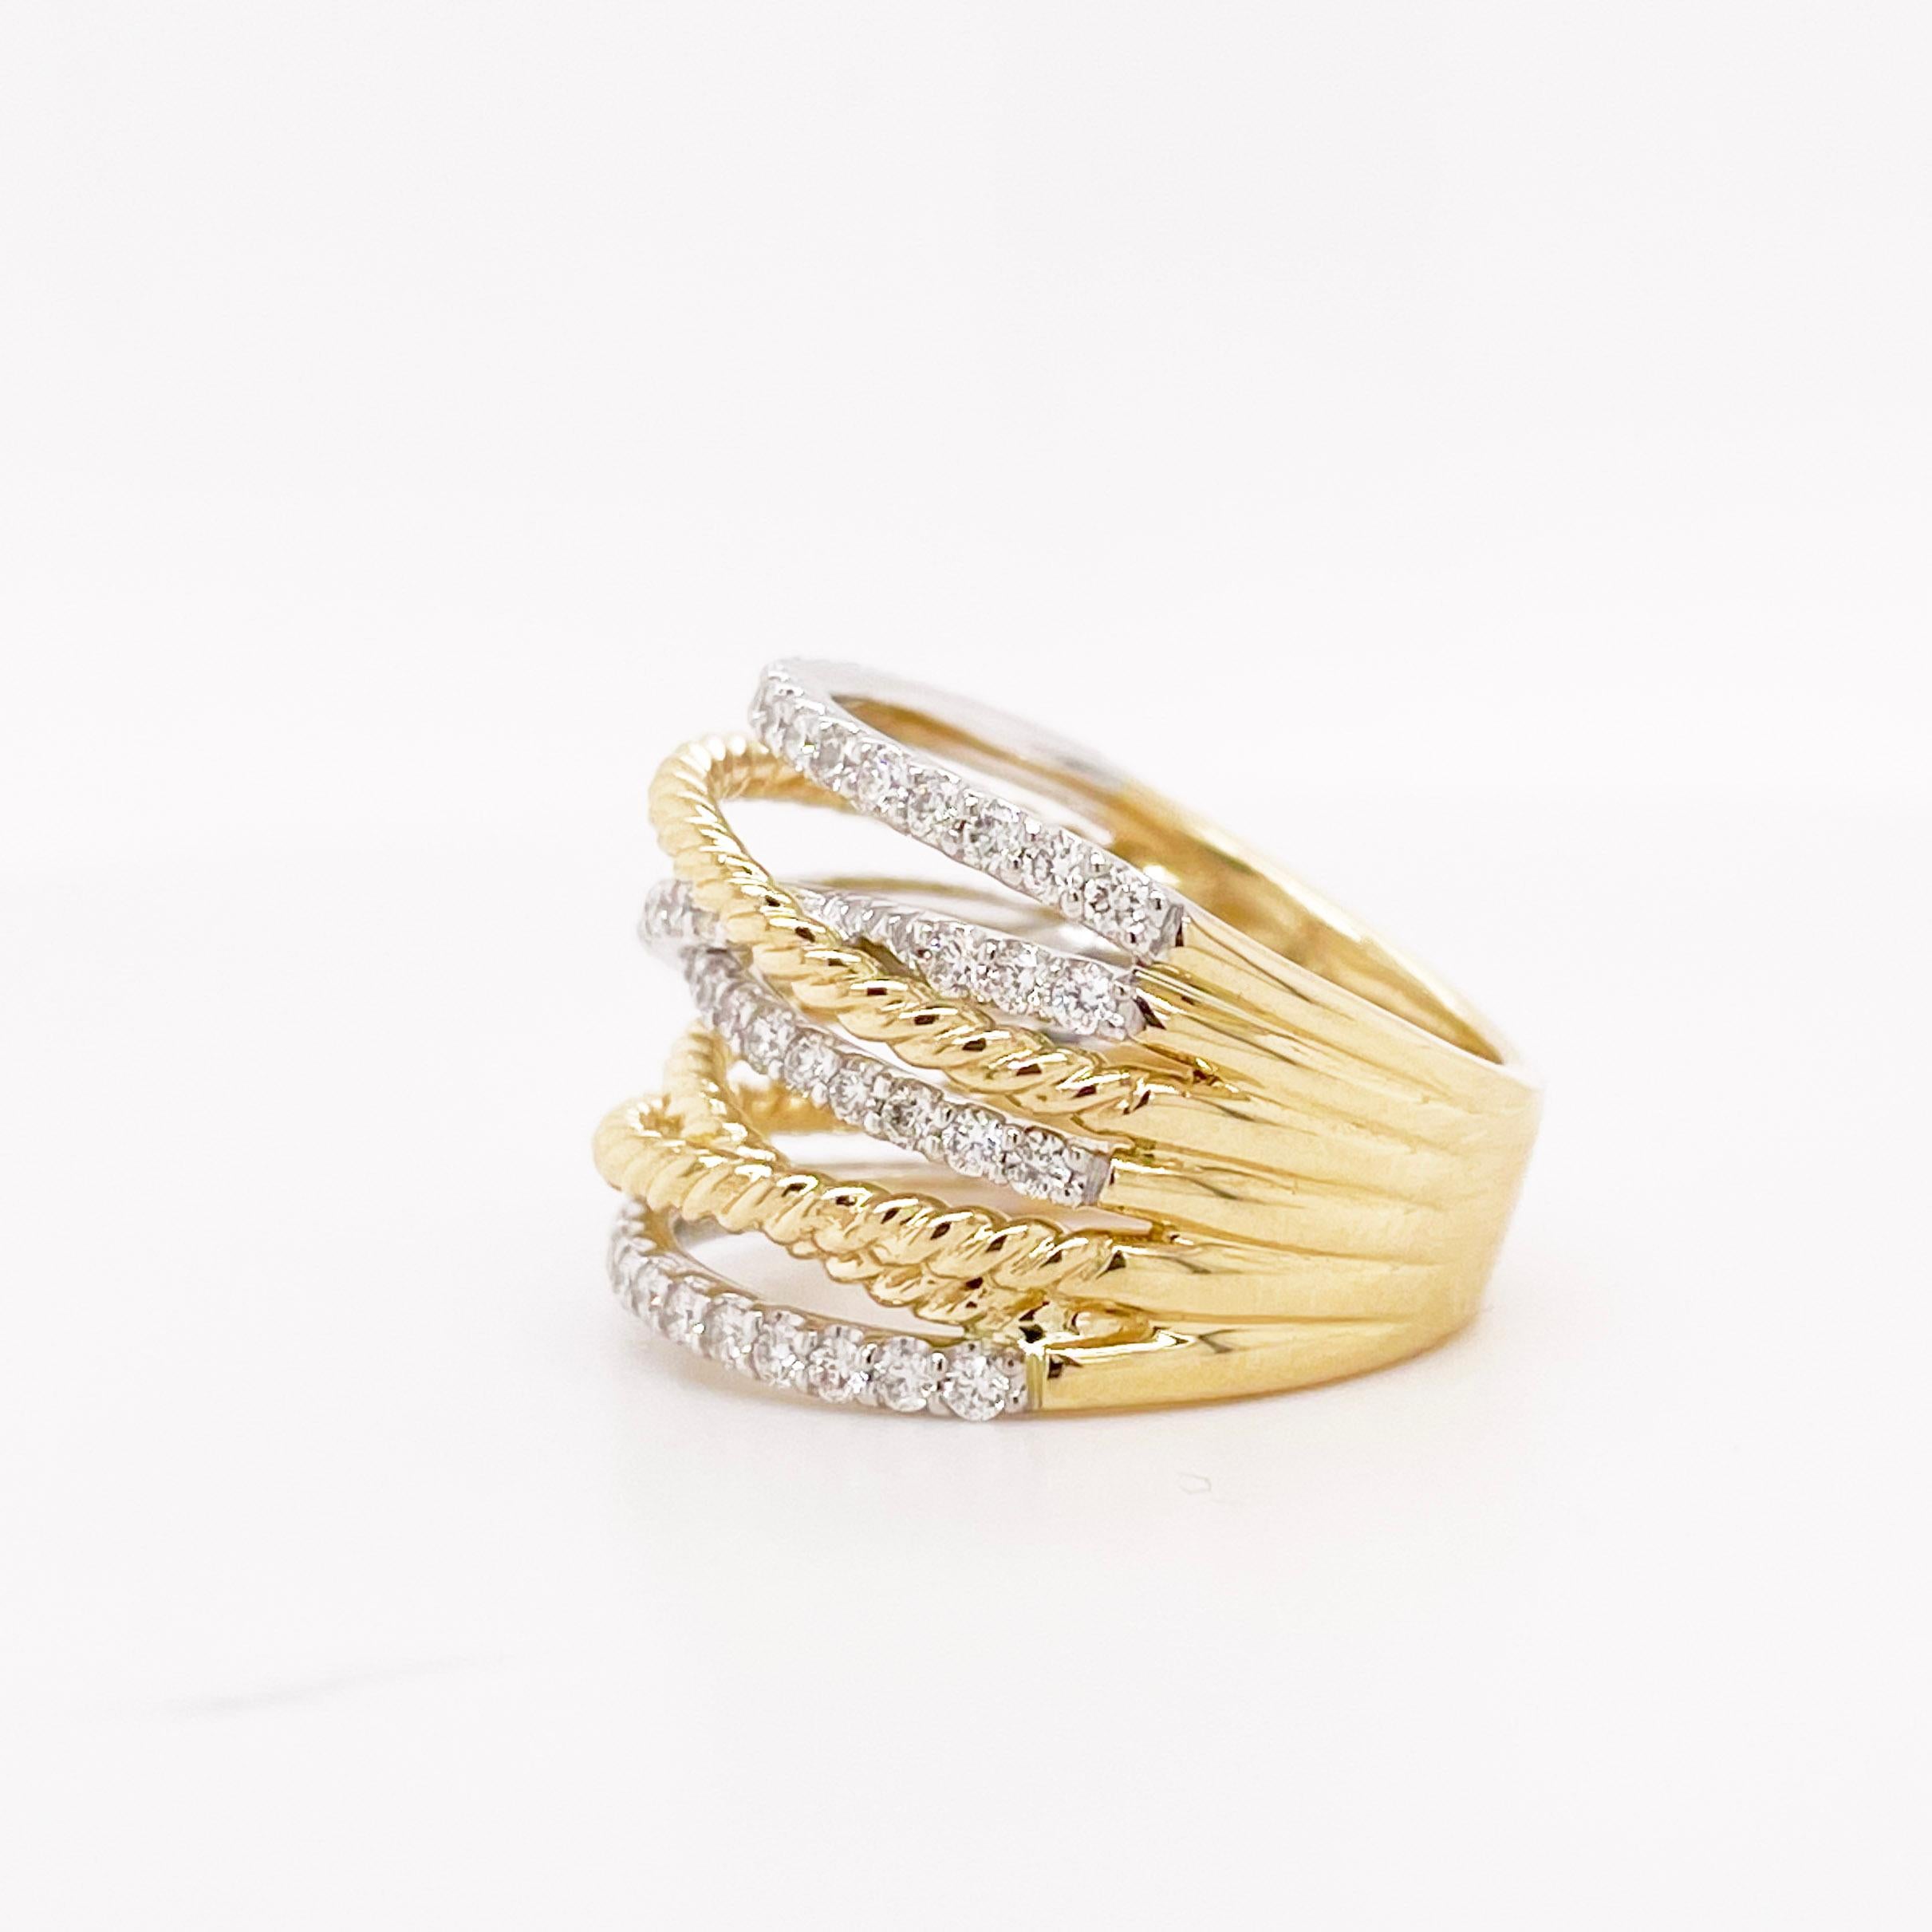 For Sale:  Twisted Rope Ring w Diamond Multi Row Band in 14K Mixed Metal 76 Diamonds 2